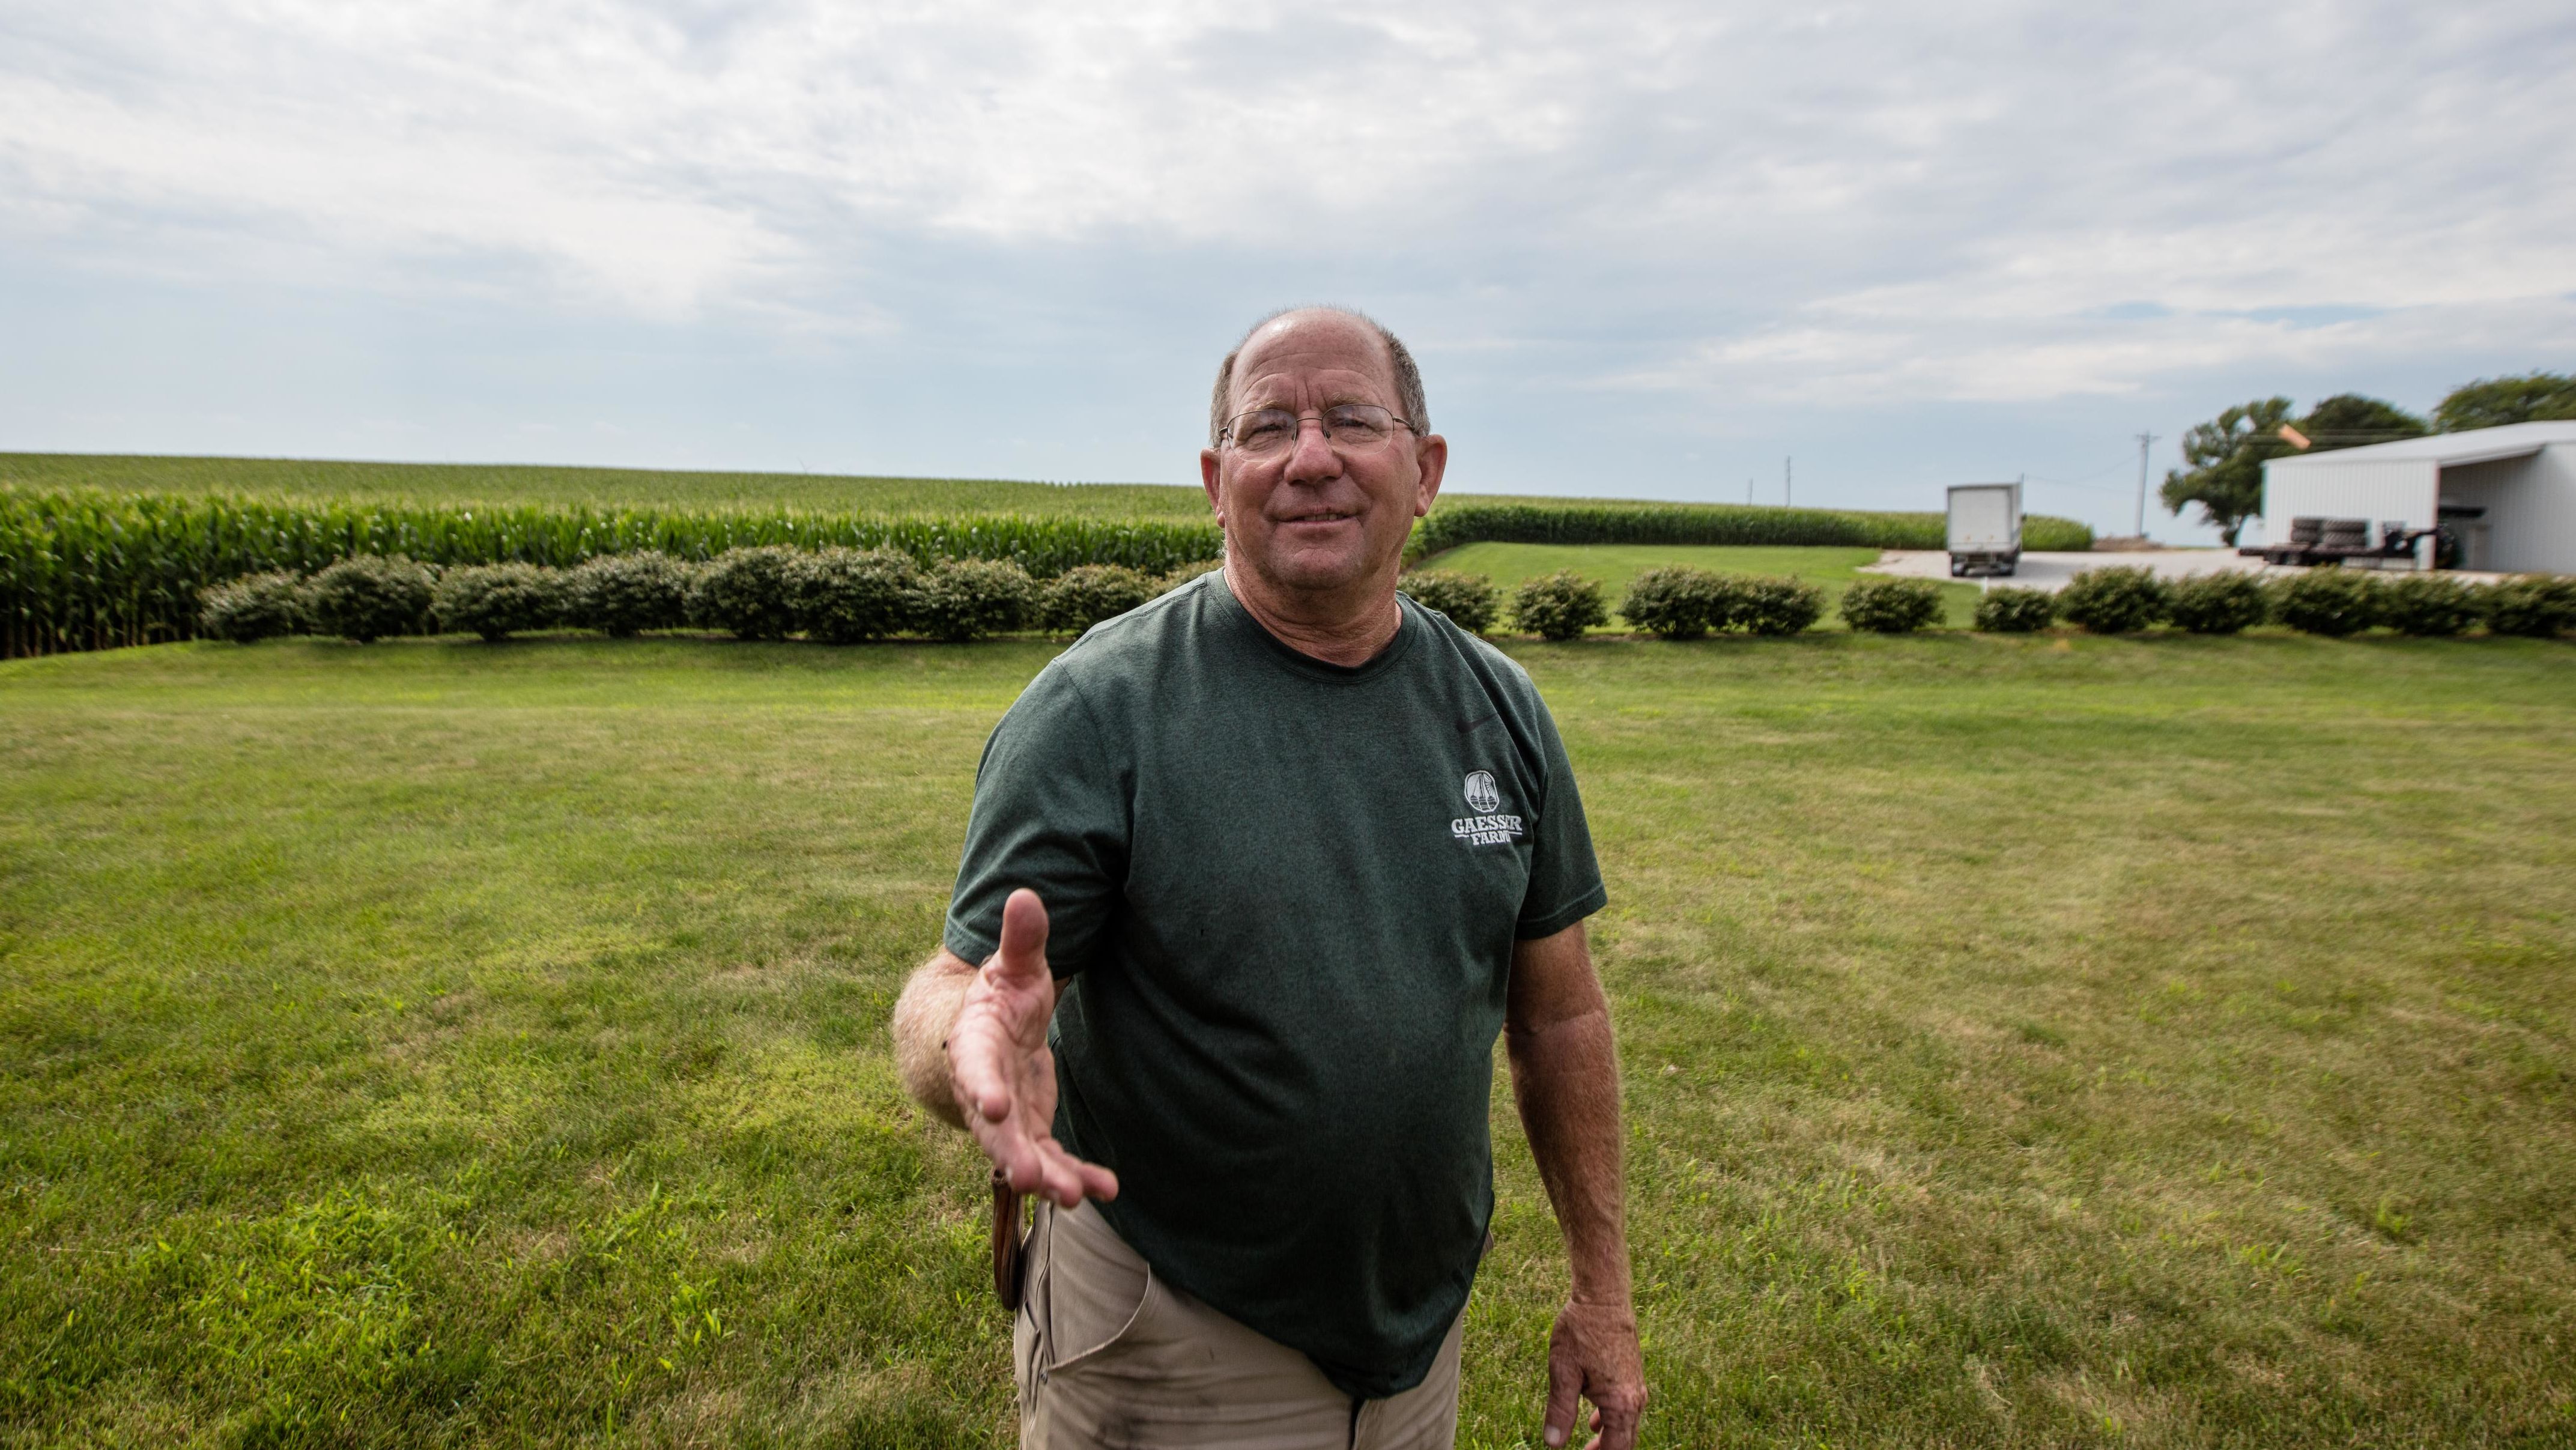 Farmer Ray Gaesser wants to do the right thing on his property, even if he's not convinced humans are wholly to blame for climate change.